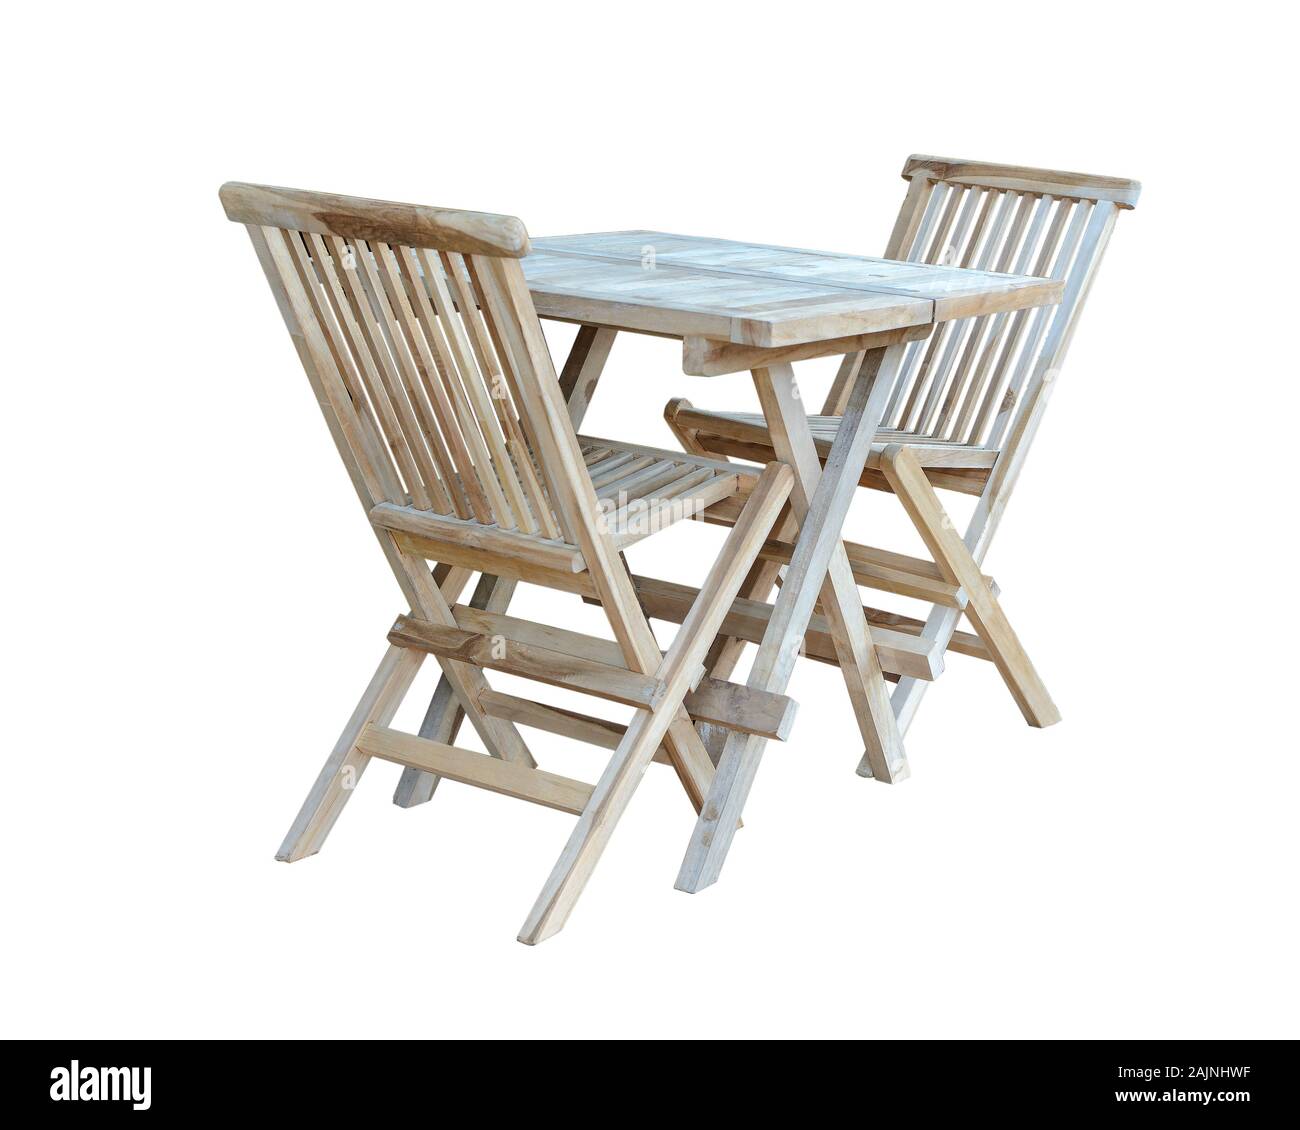 https://c8.alamy.com/comp/2AJNHWF/set-of-folding-wooden-furniture-for-the-garden-or-kitchen-isolated-on-a-white-background-2AJNHWF.jpg